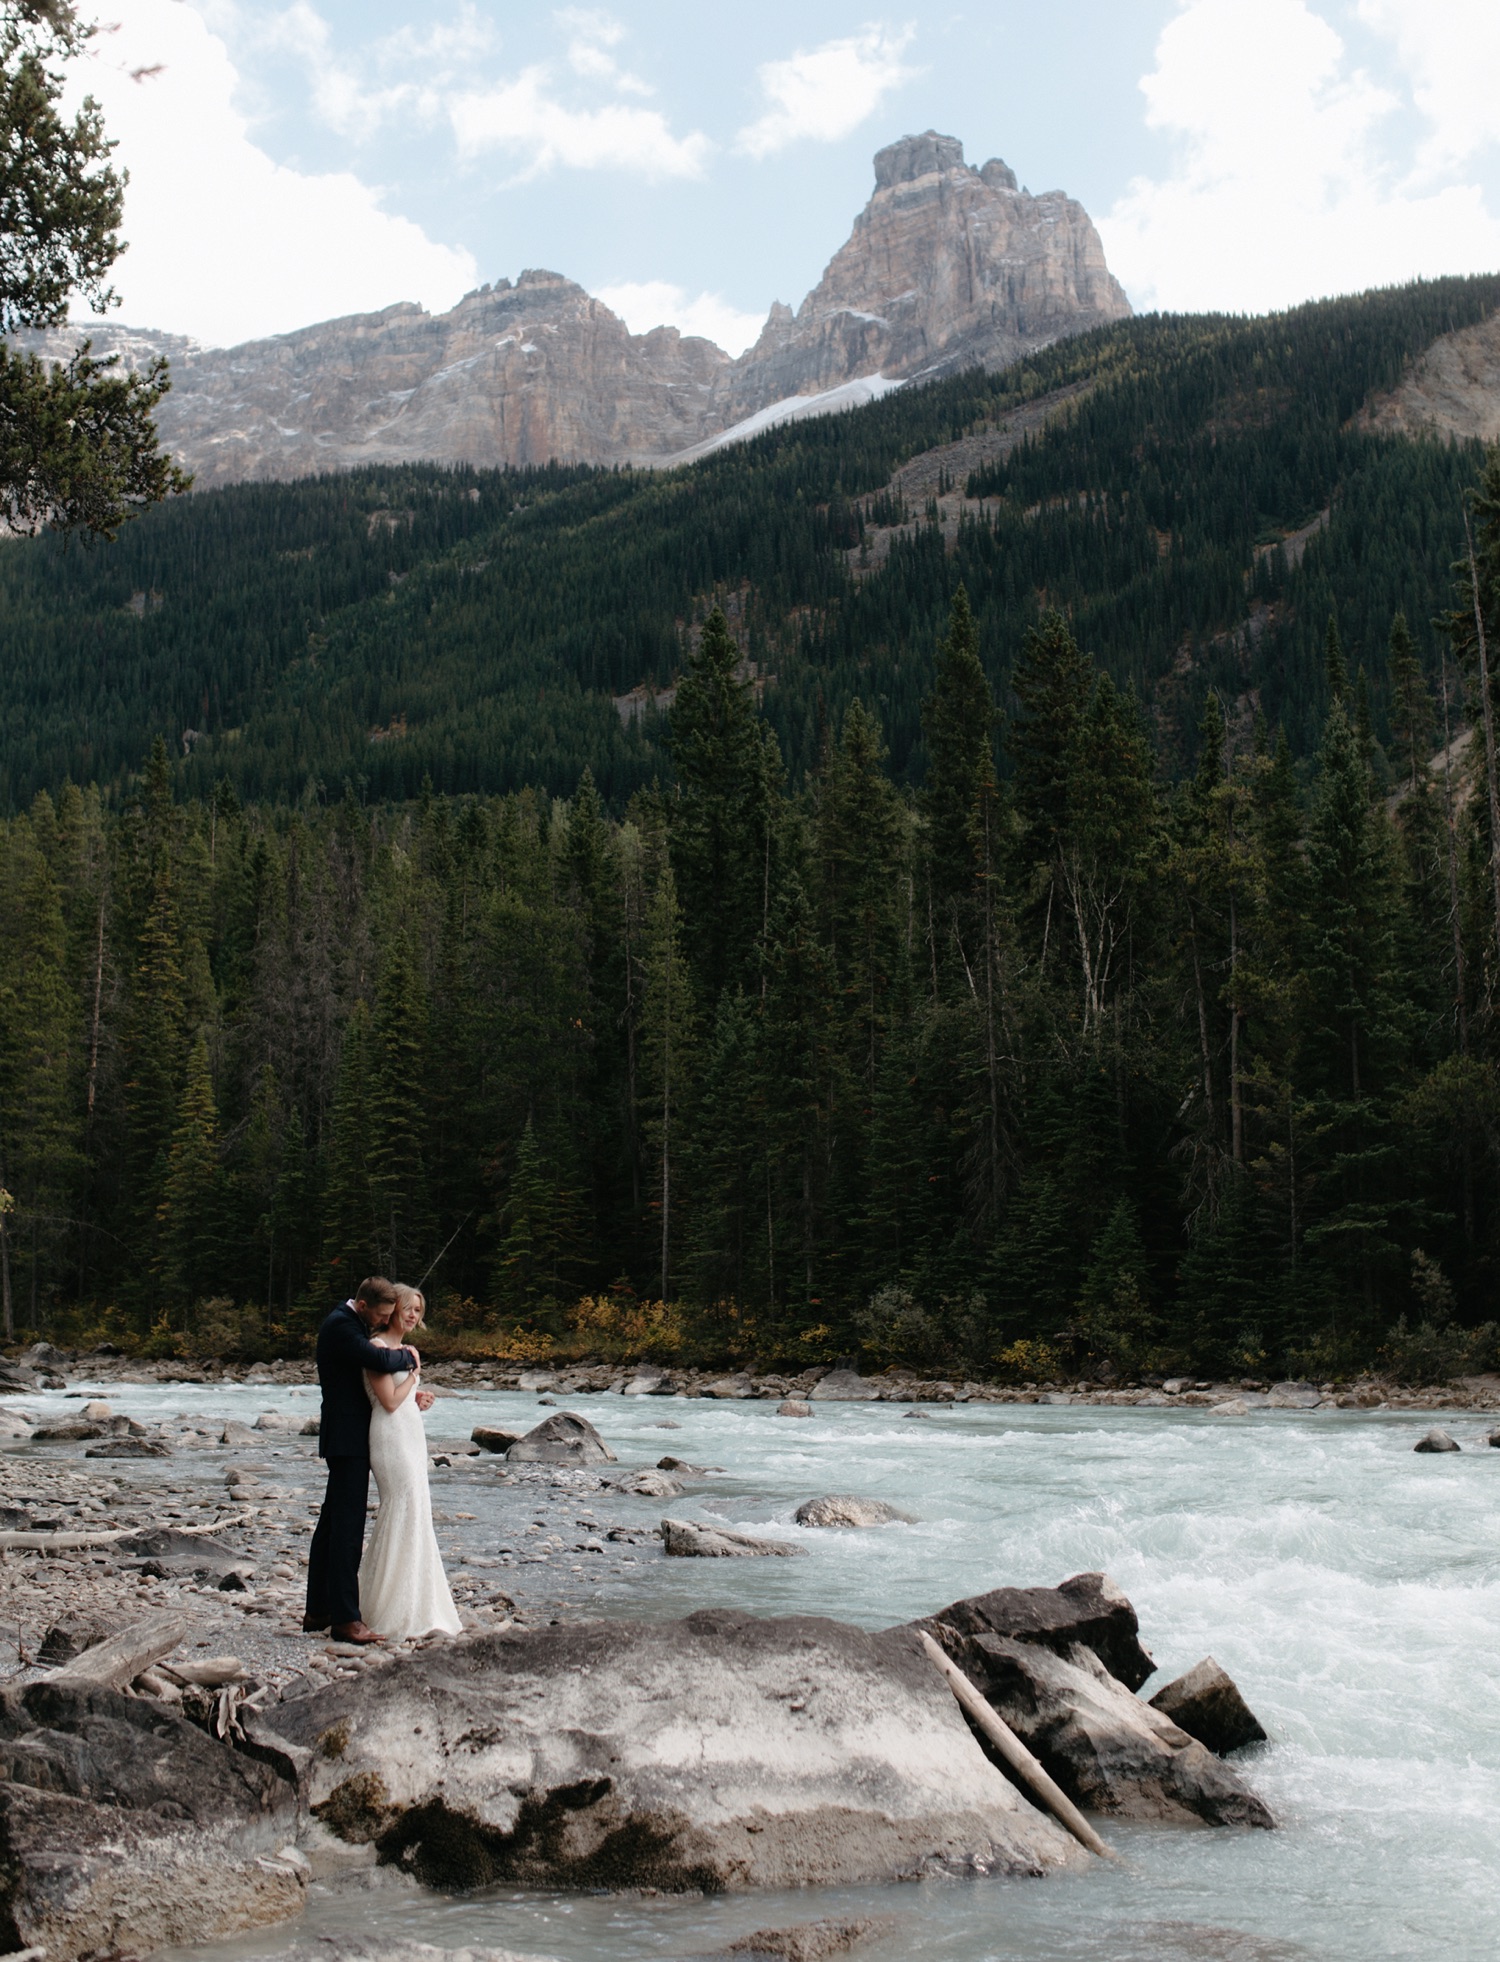 Cathedral Mountain Lodge elopement inspiration along a galcial fed river in Yoho National Park